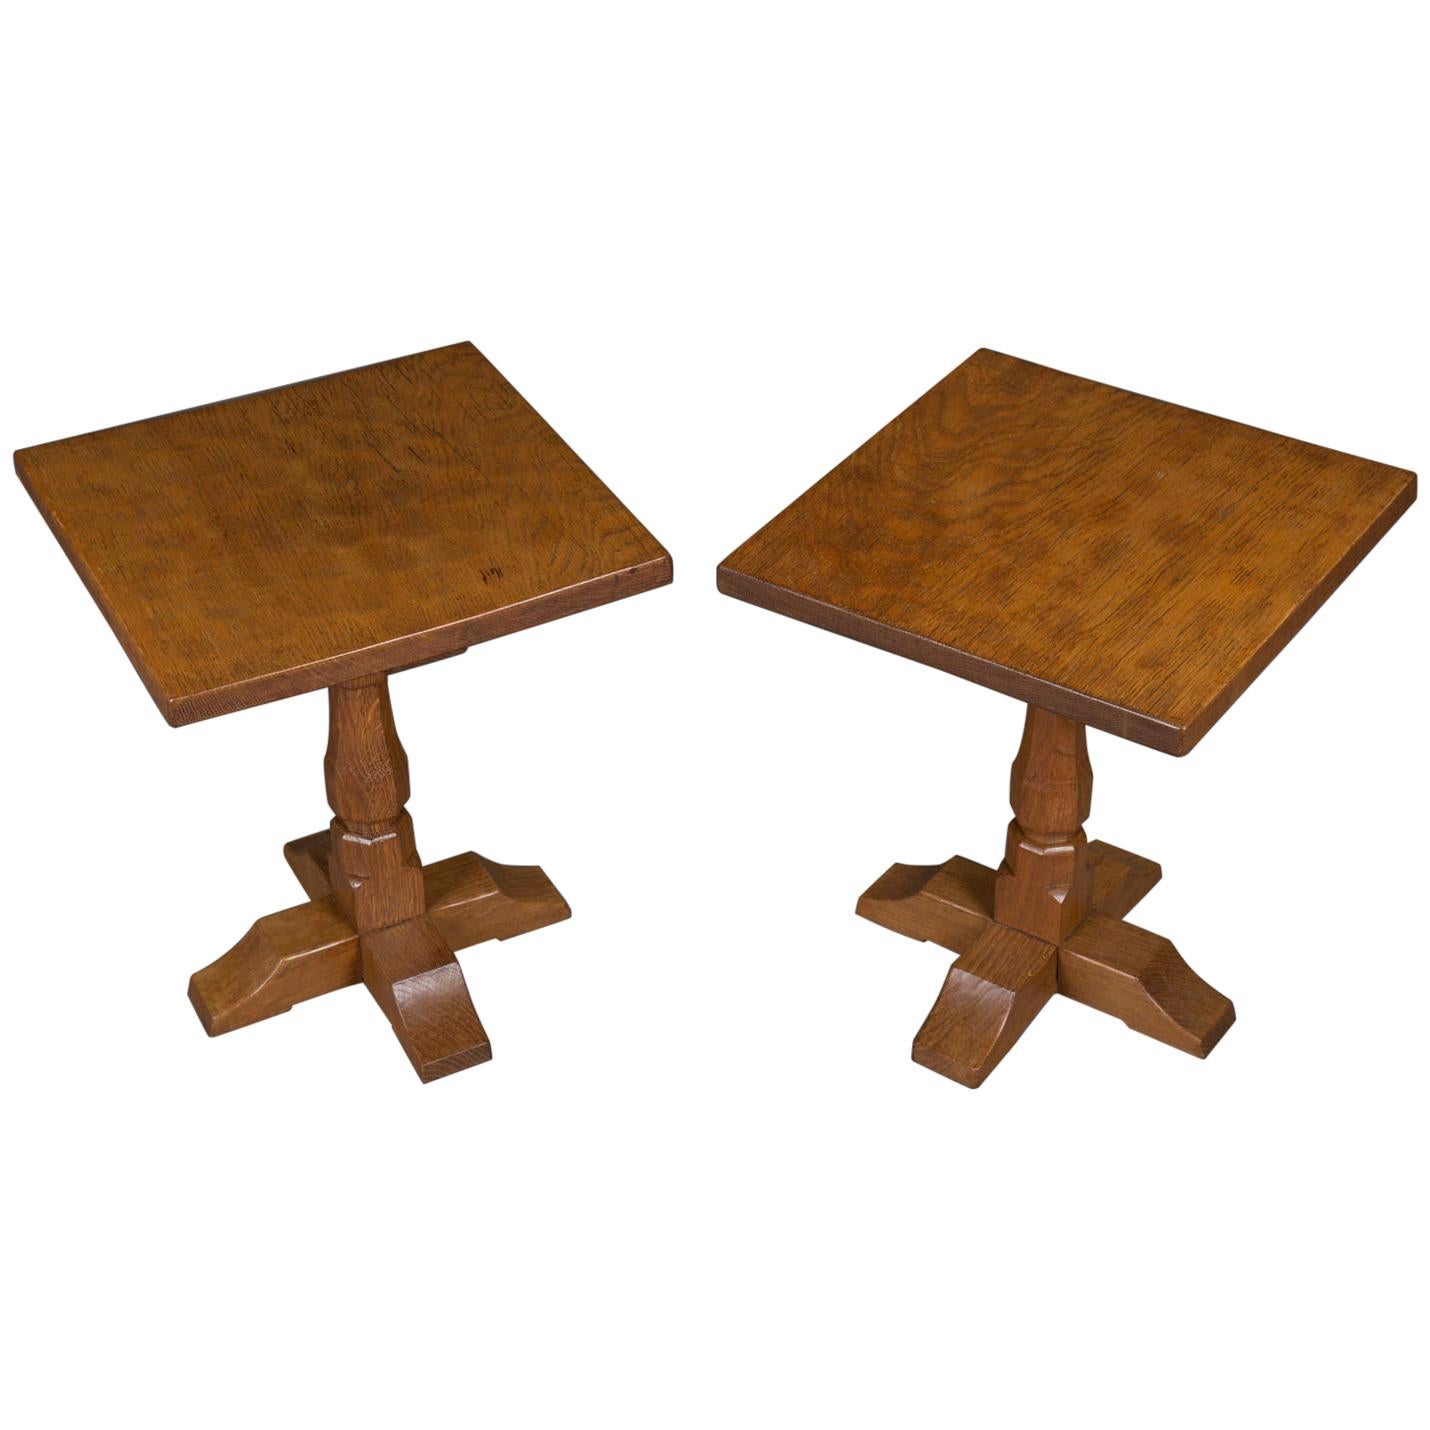 Mouseman in the Style of Pair of Arts & Crafts Yorkshire School Oak Side Tables For Sale